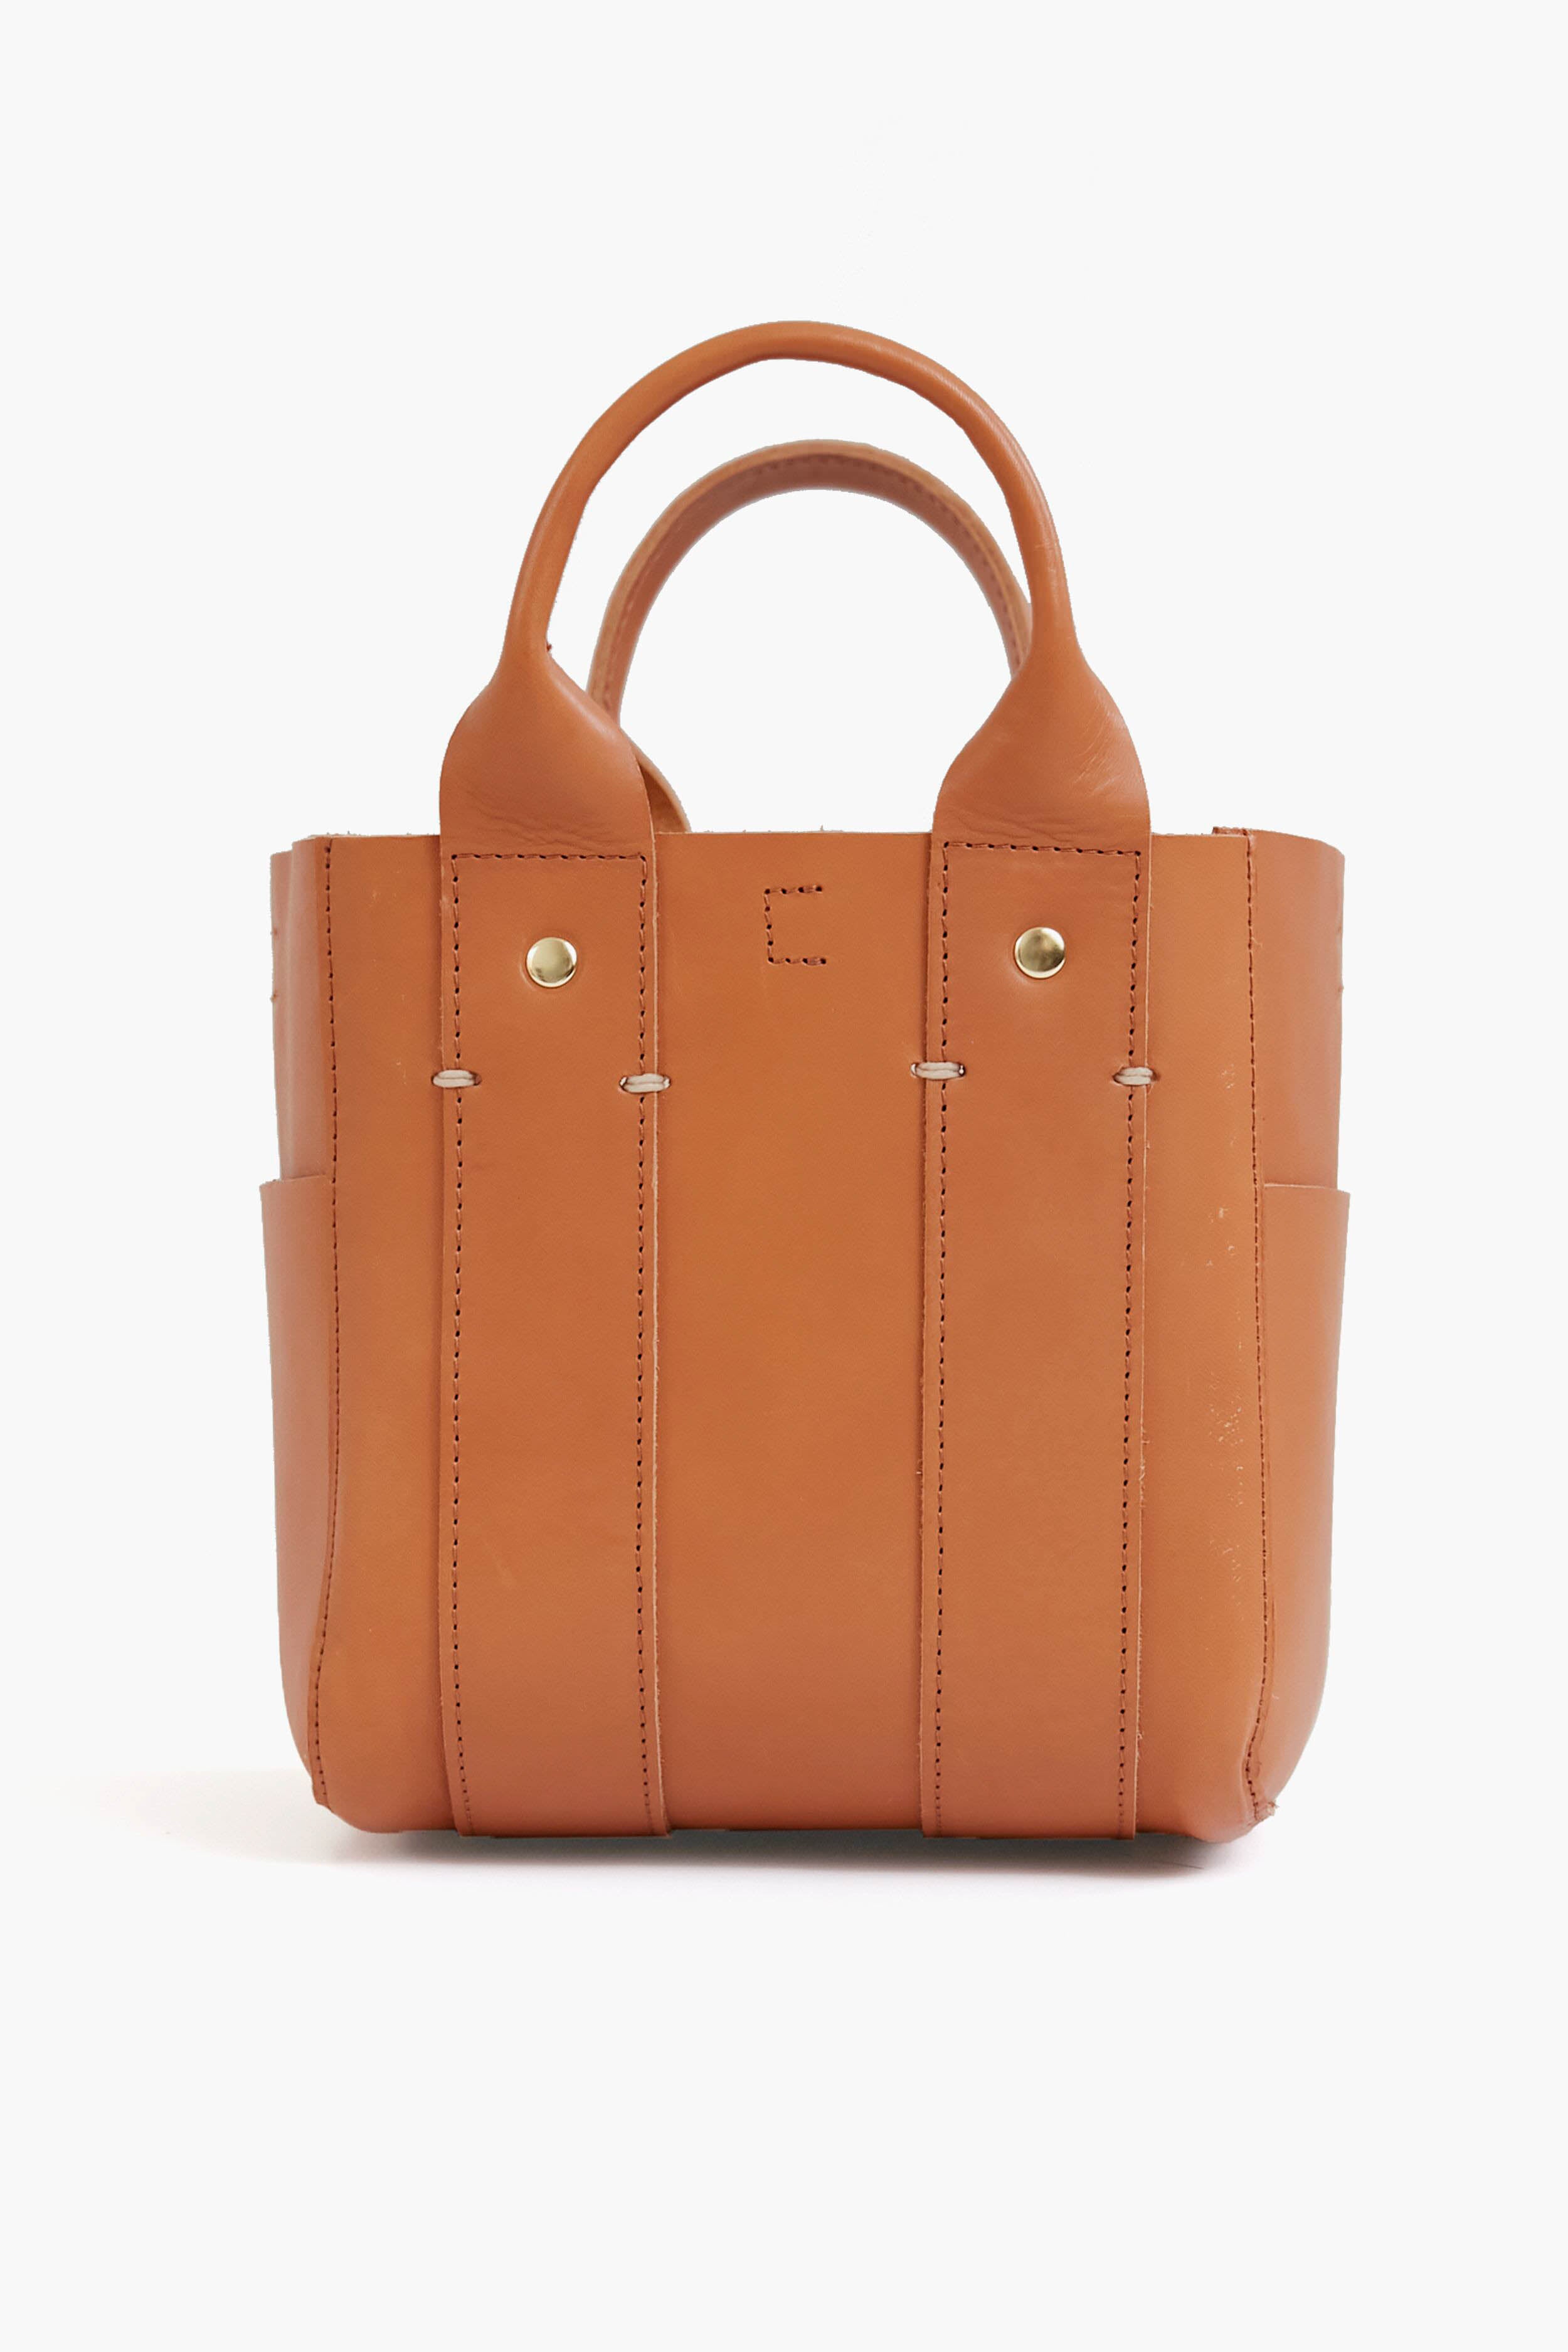 Clare V. Le Petit Box Tote in Chocolate Suede